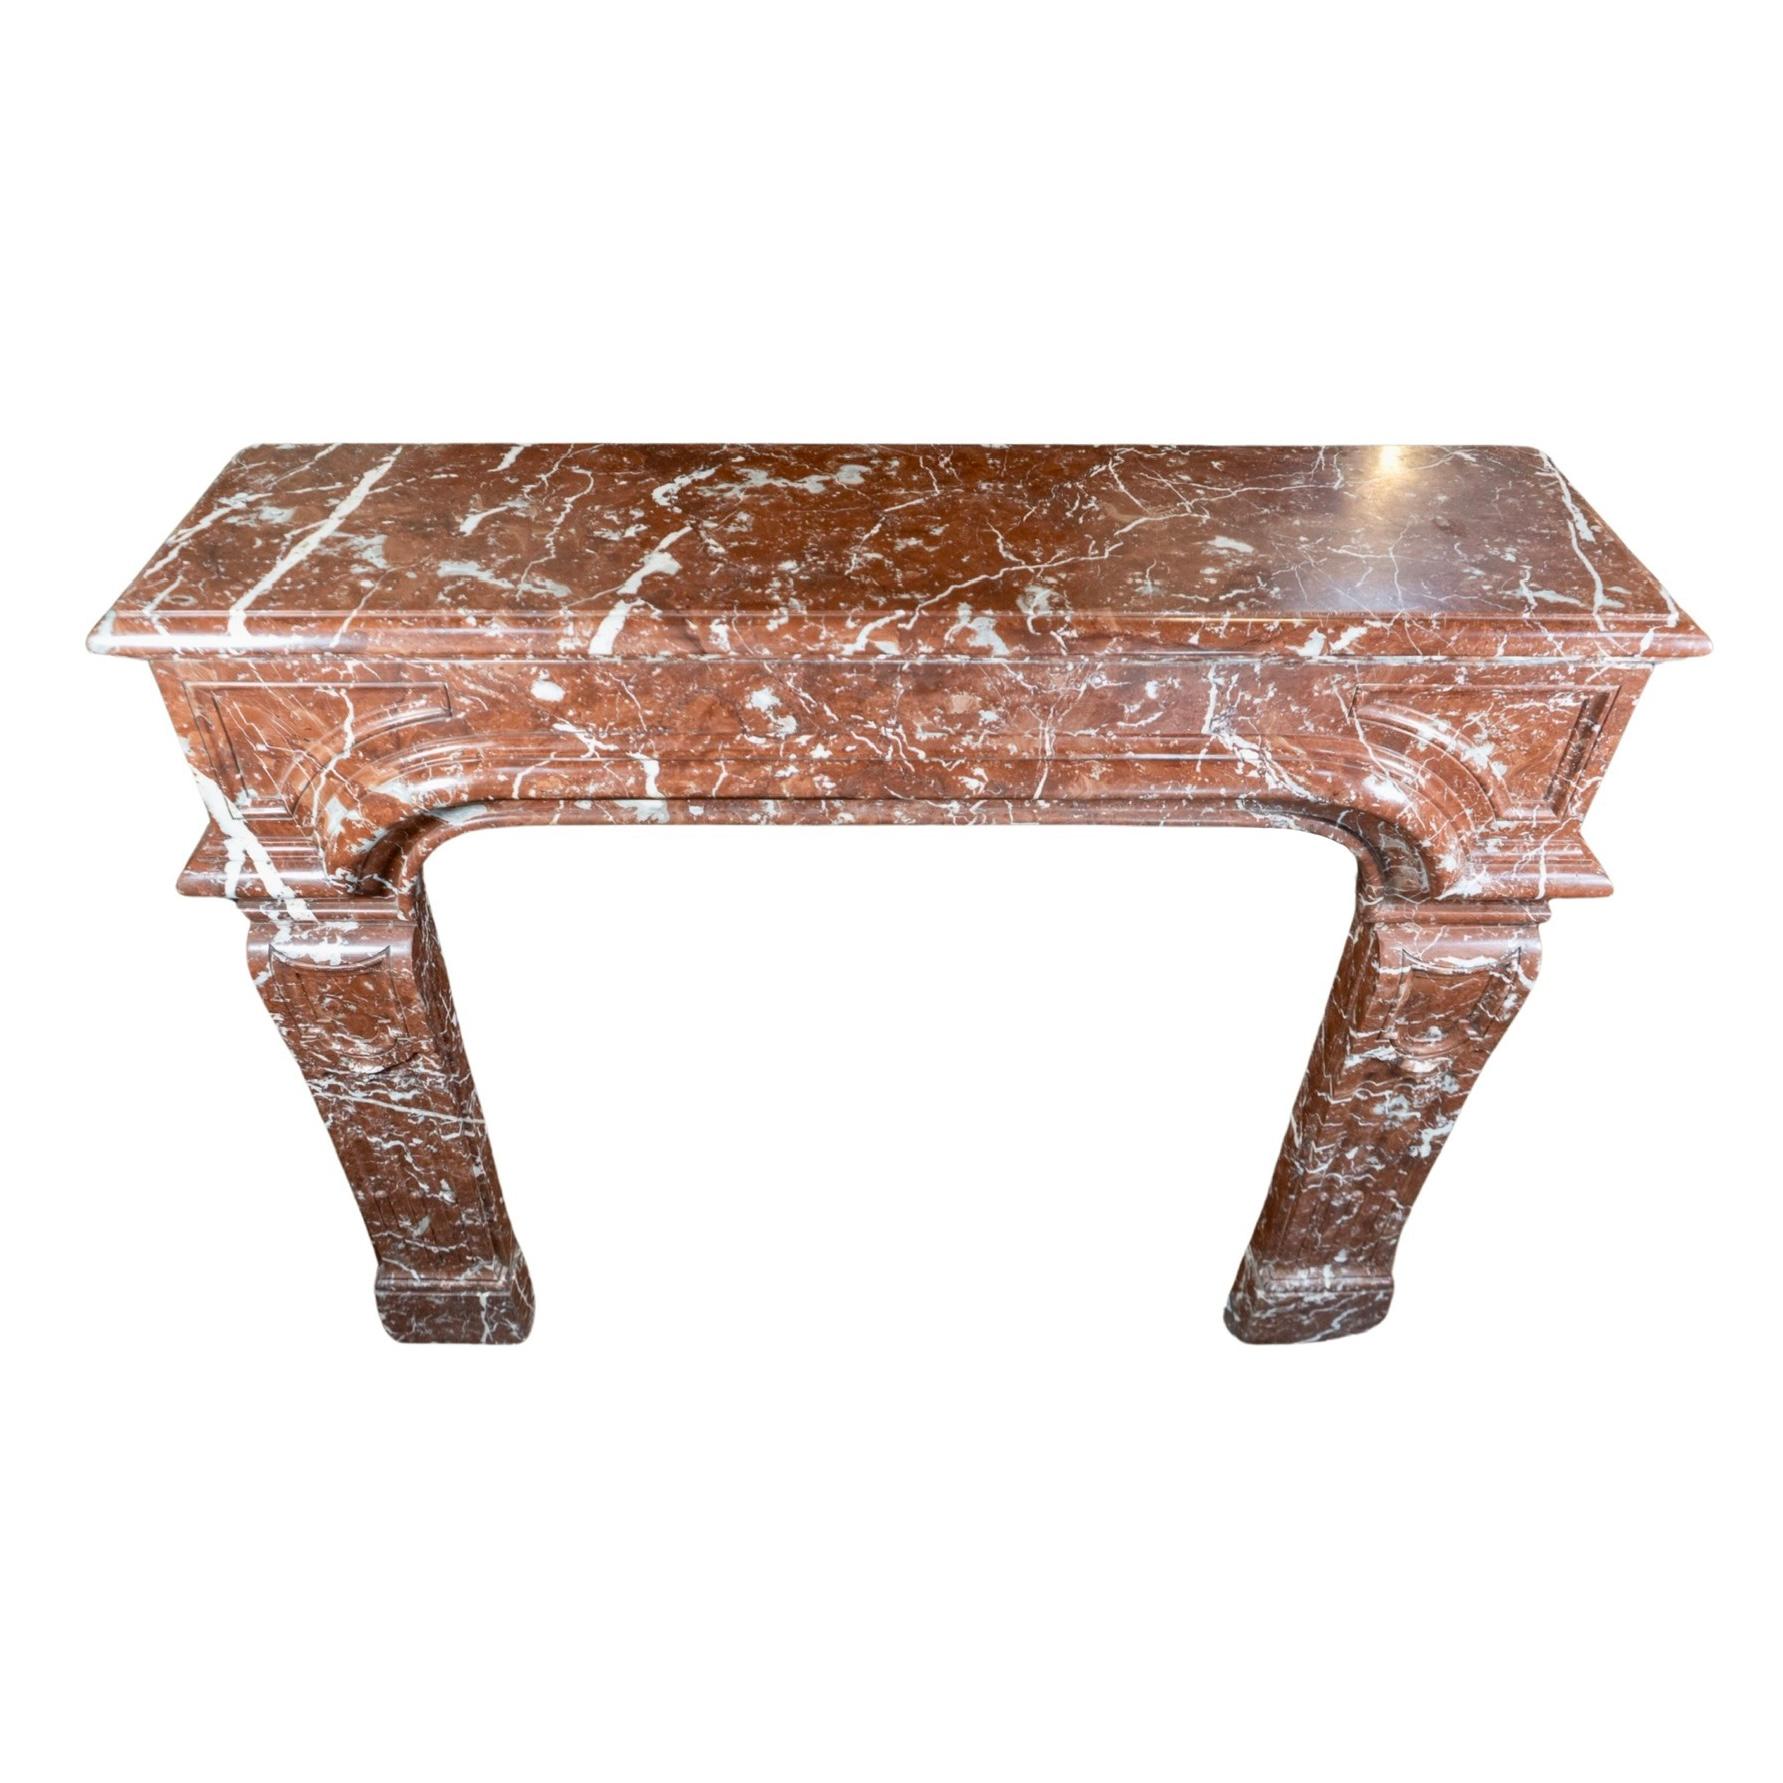 Expertly crafted from French Red Griotte marble, this 1870s mantel features intricate style carvings and rich veining that add a touch of elegance to any space. Made in France, this mantel is a timeless addition to your home.